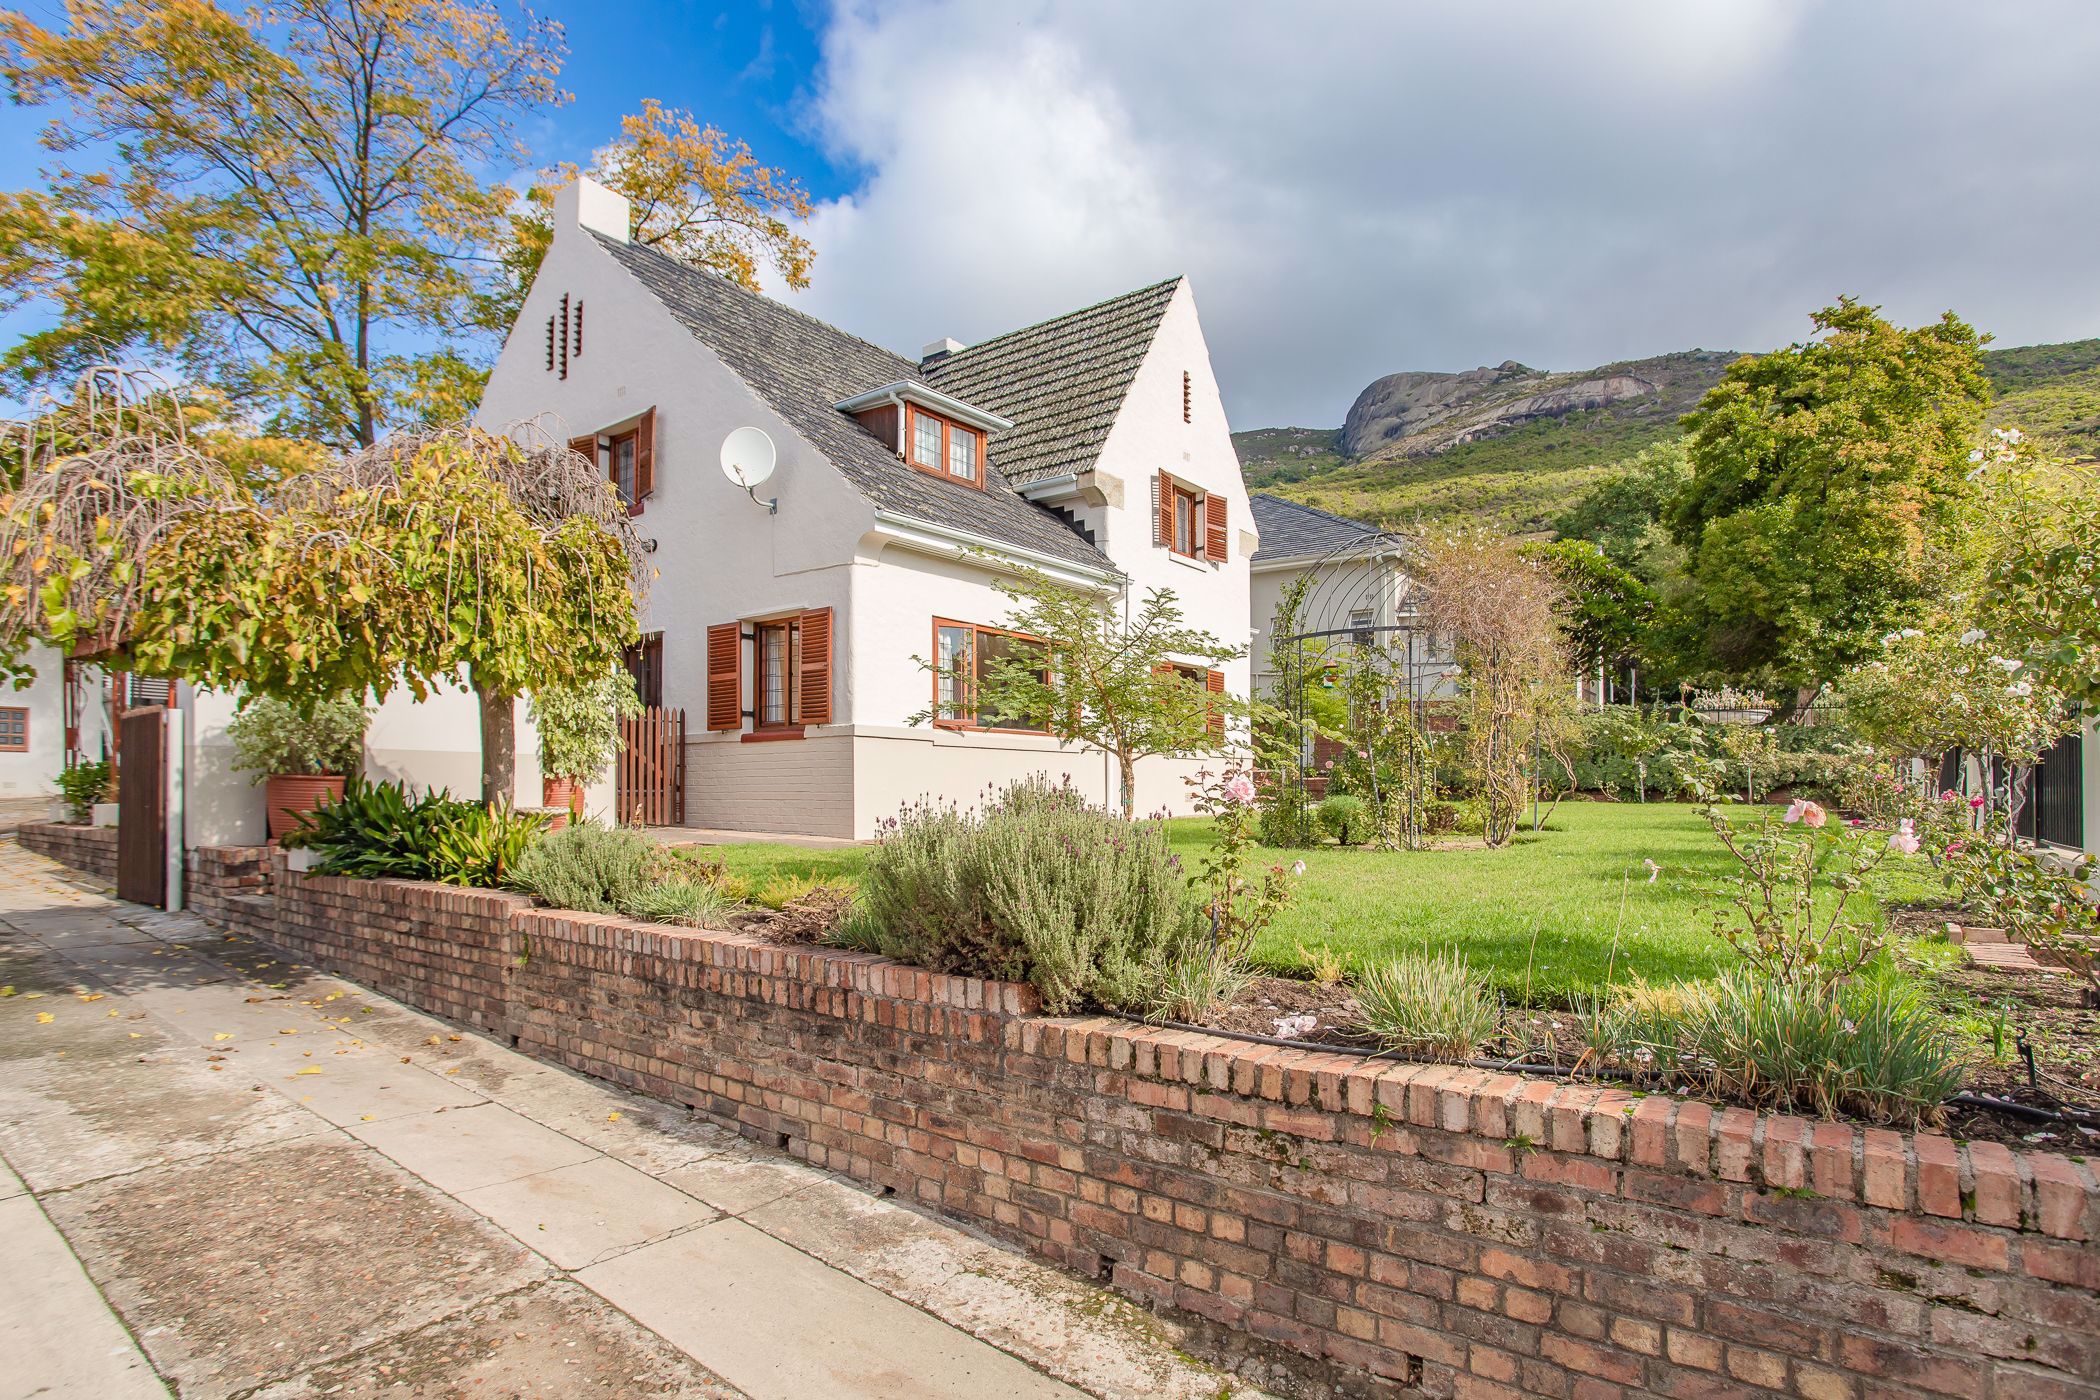 4 bedroom house for sale in Paarl